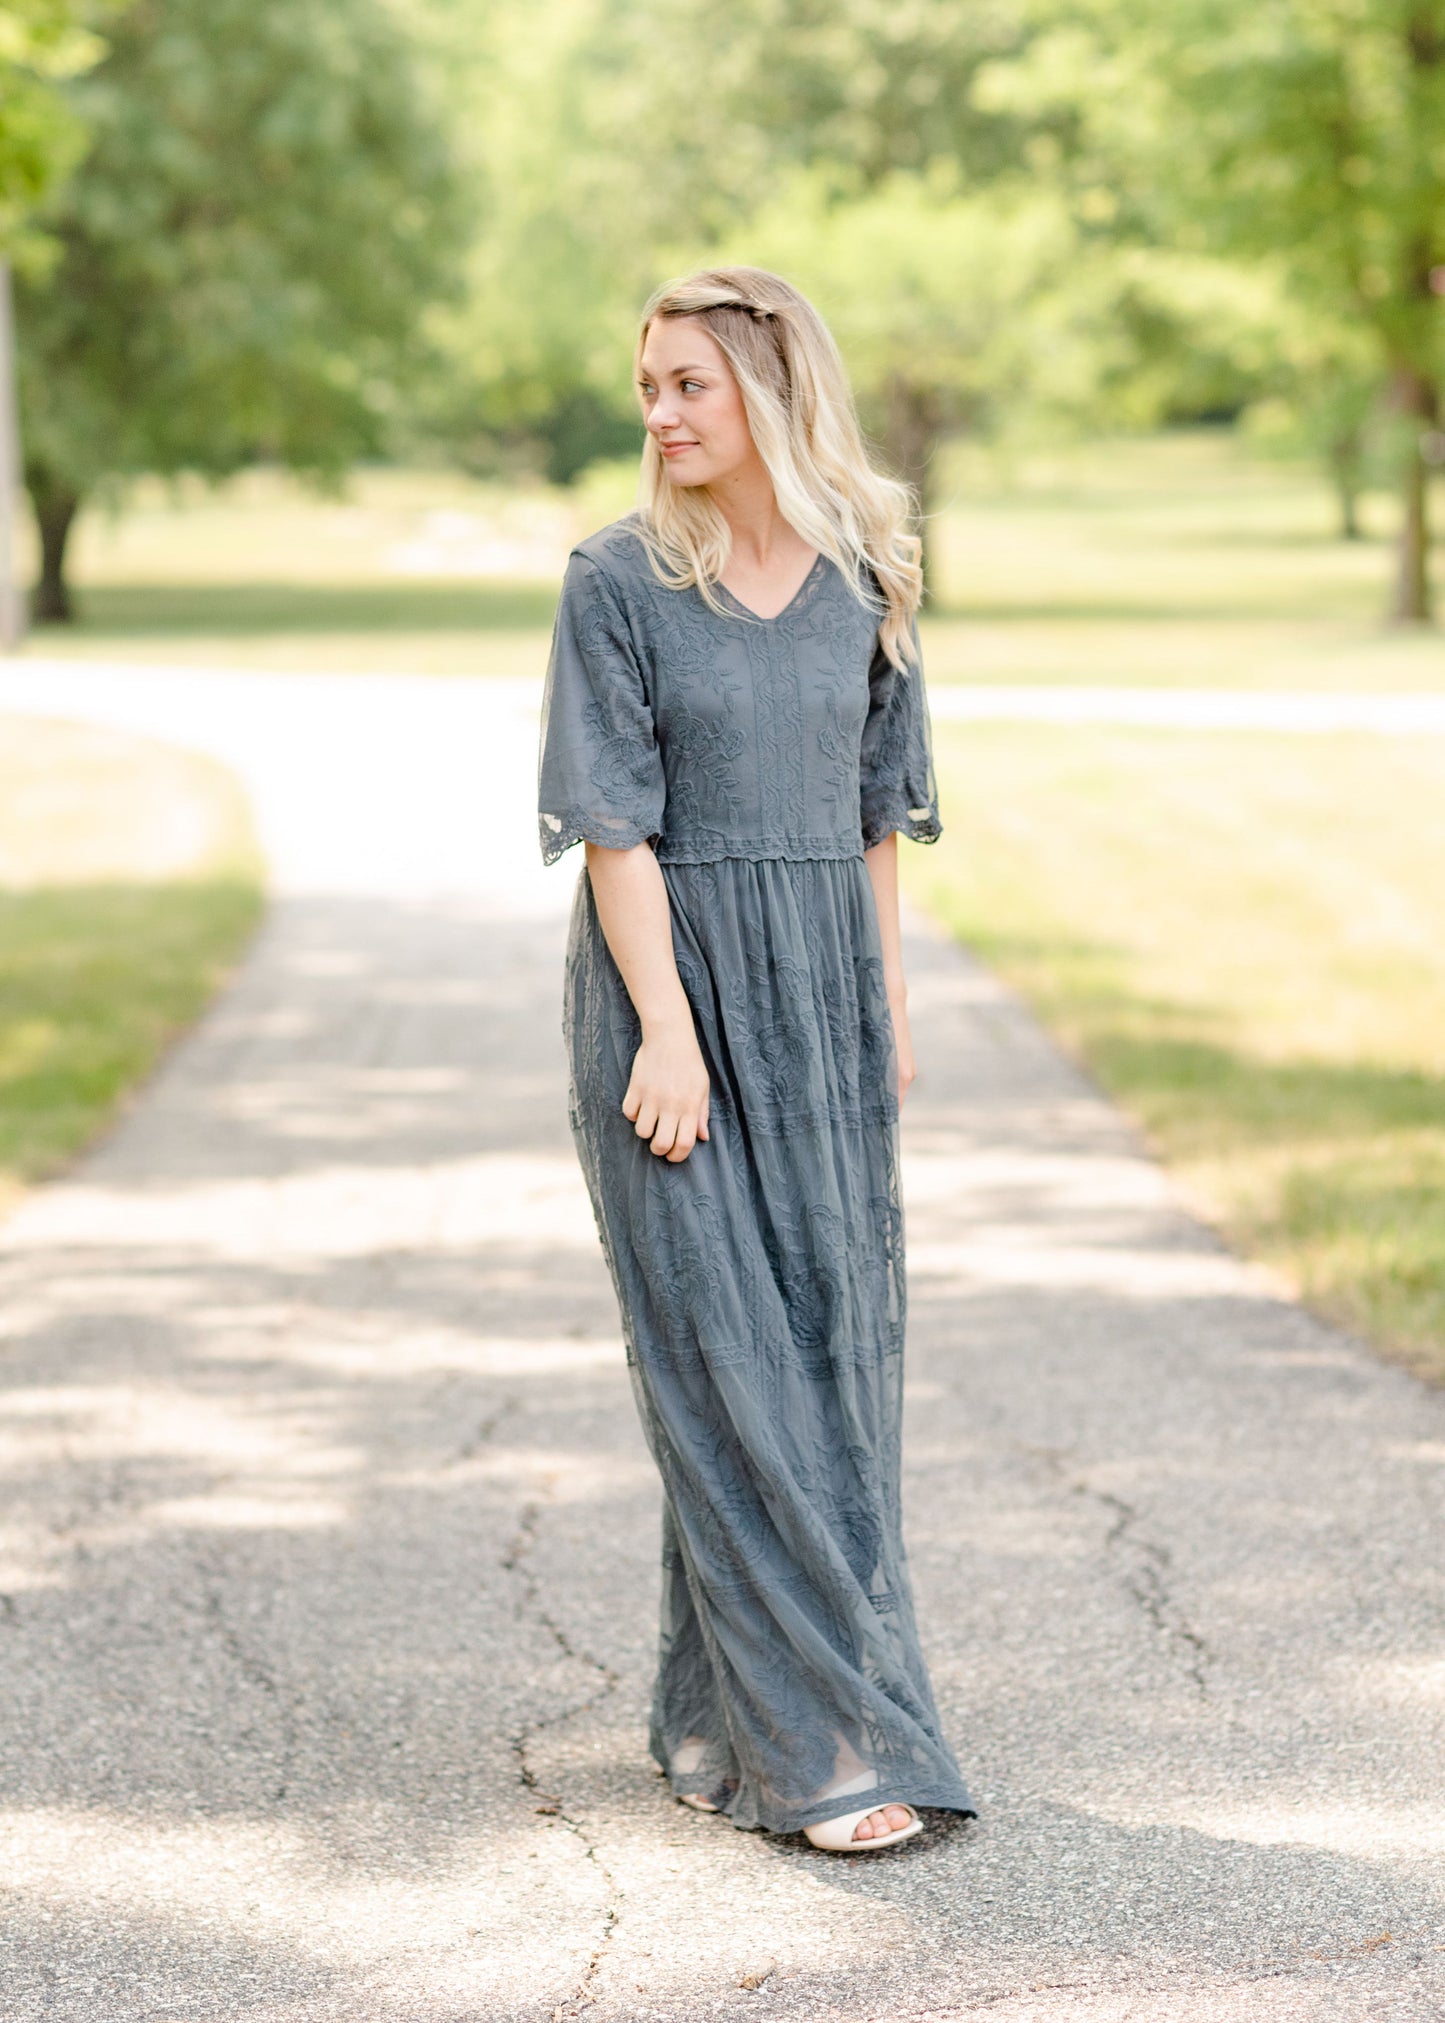 Lace Overlay Bell Sleeve Maxi Dress - FINAL SALE Dresses Charcoal / S/M